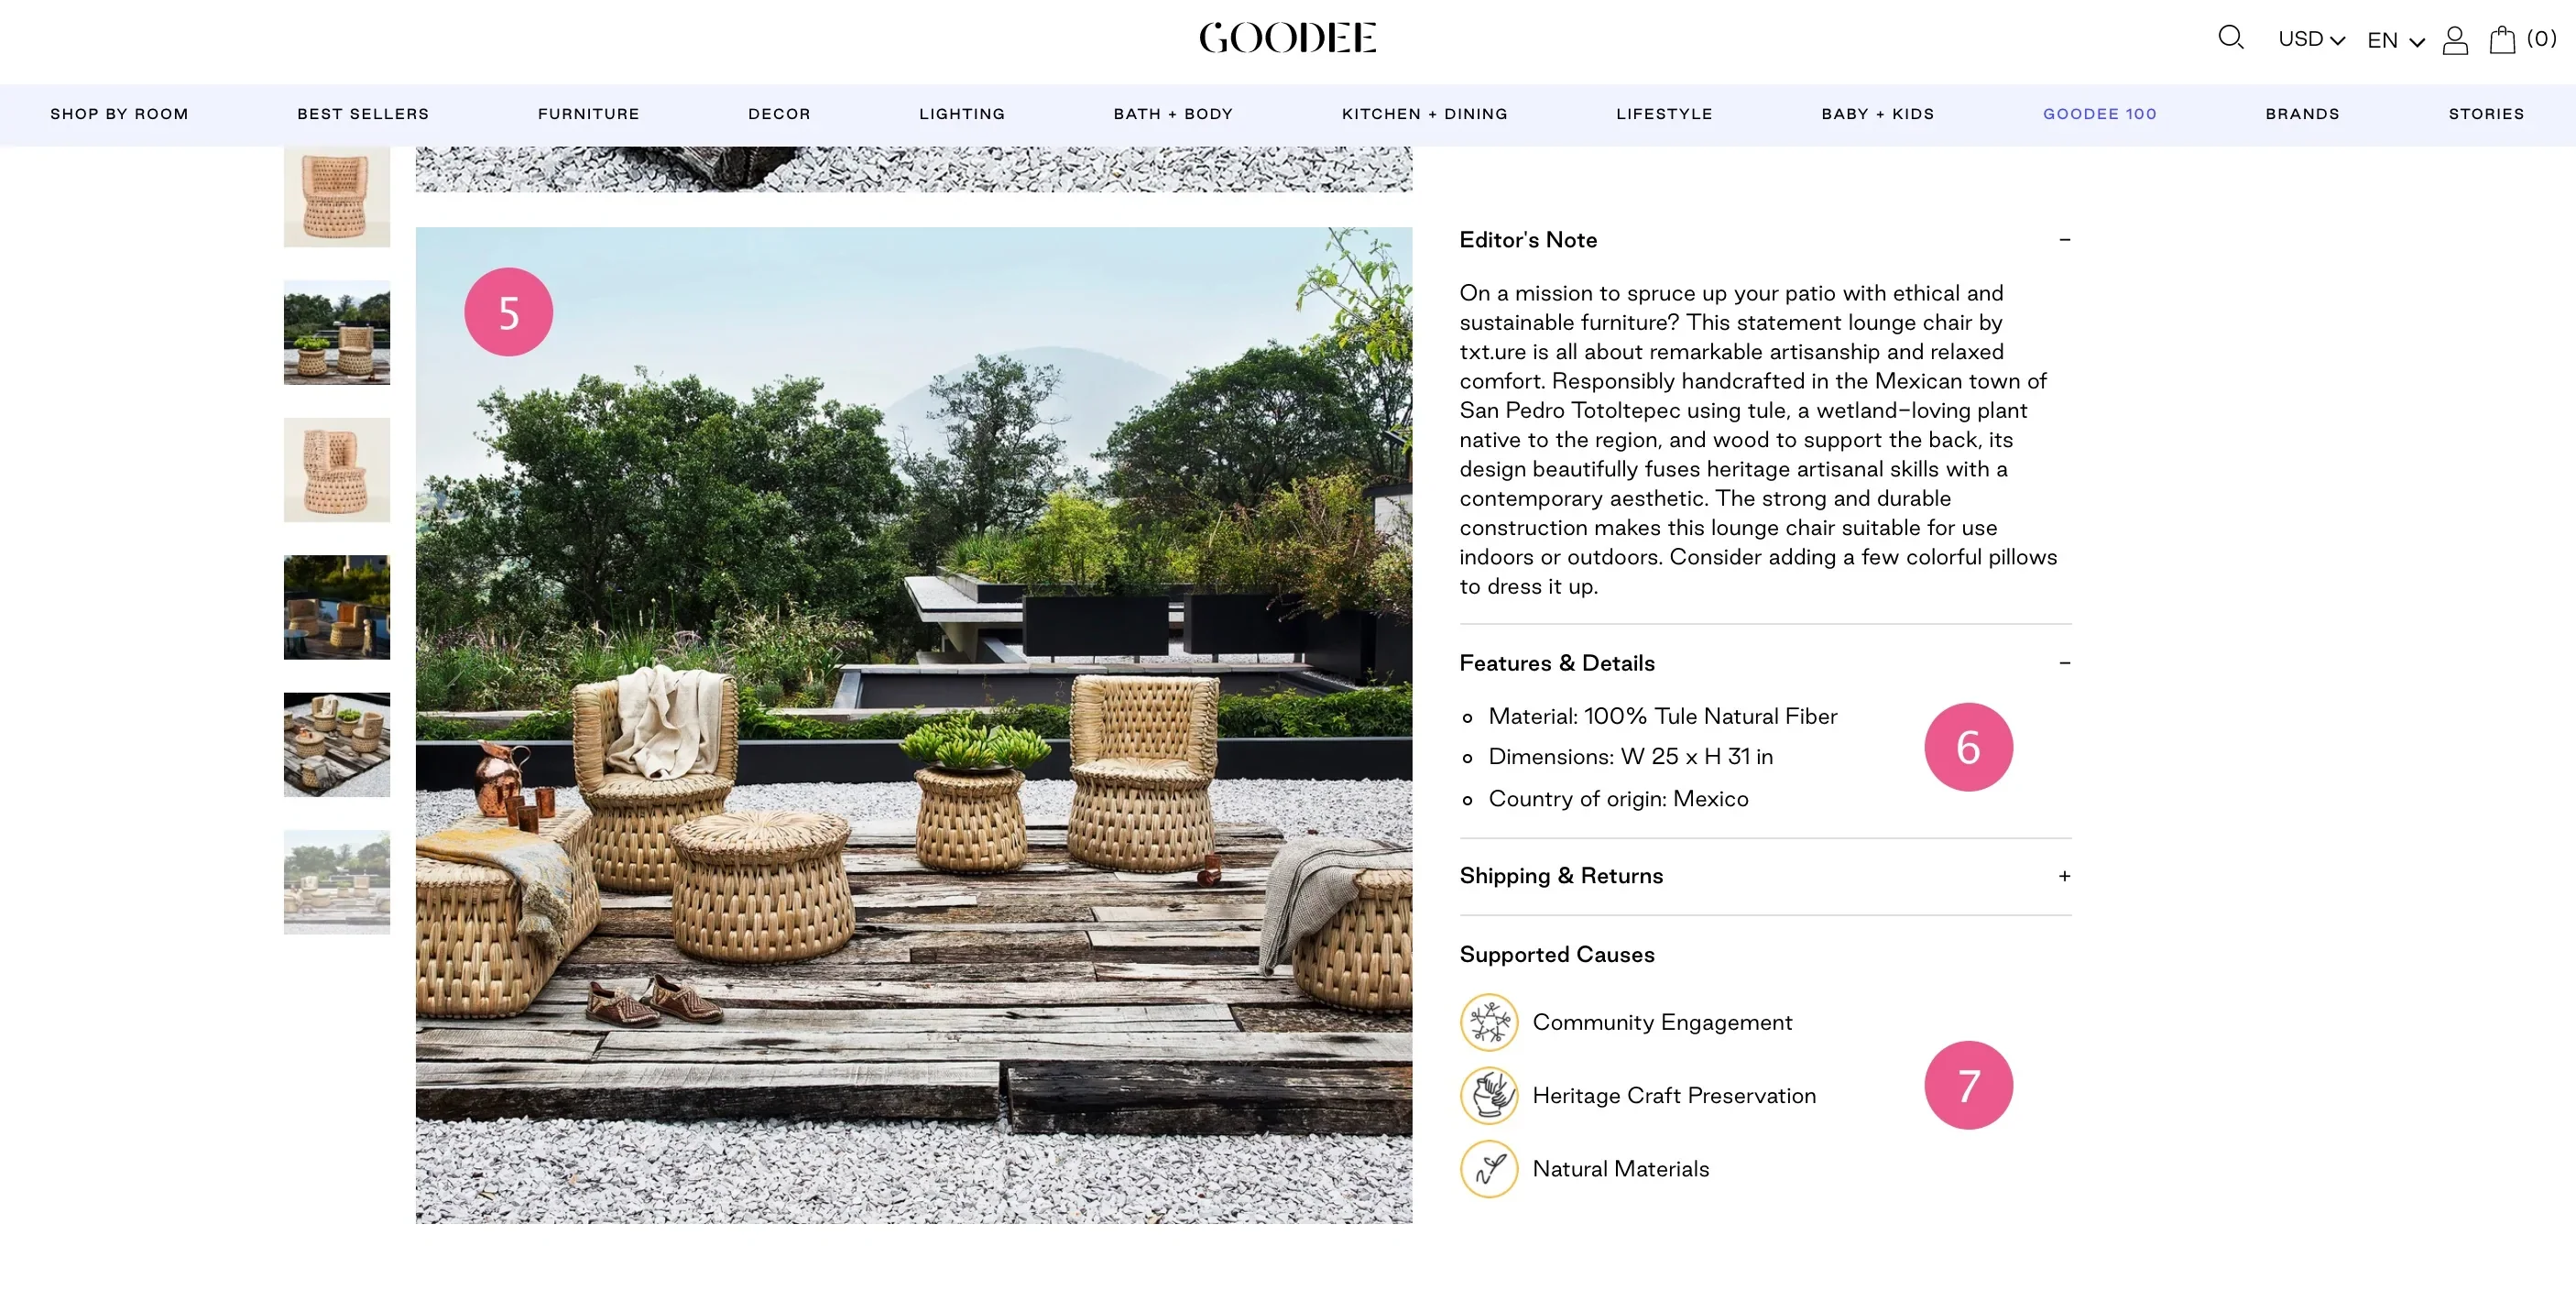 Product page from furniture brand GOODEE